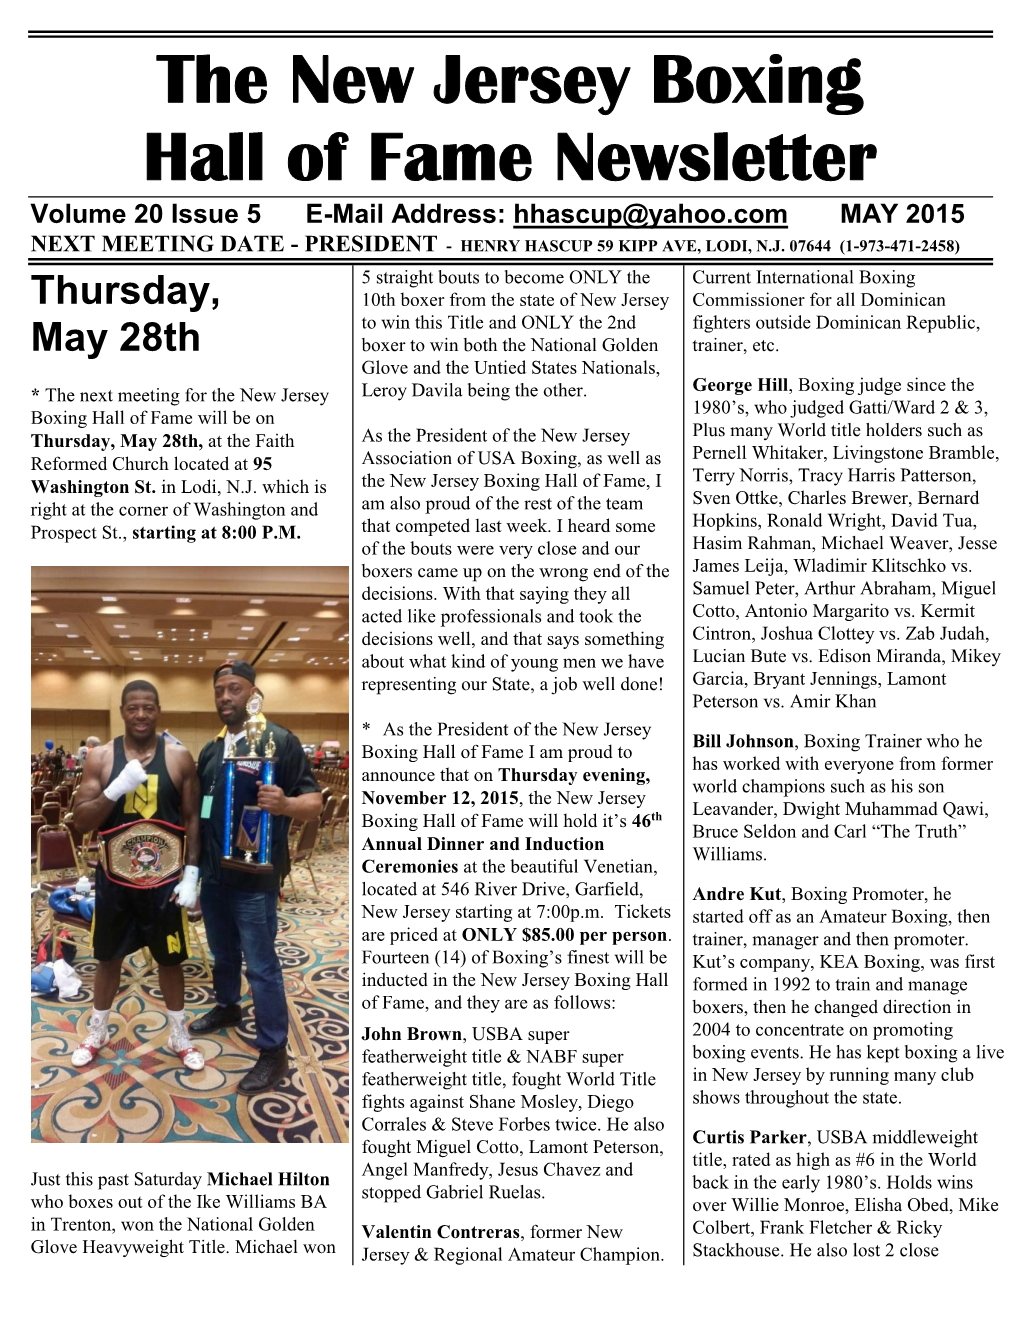 N.J. Boxing Hall of Fame Newsletter May 2015